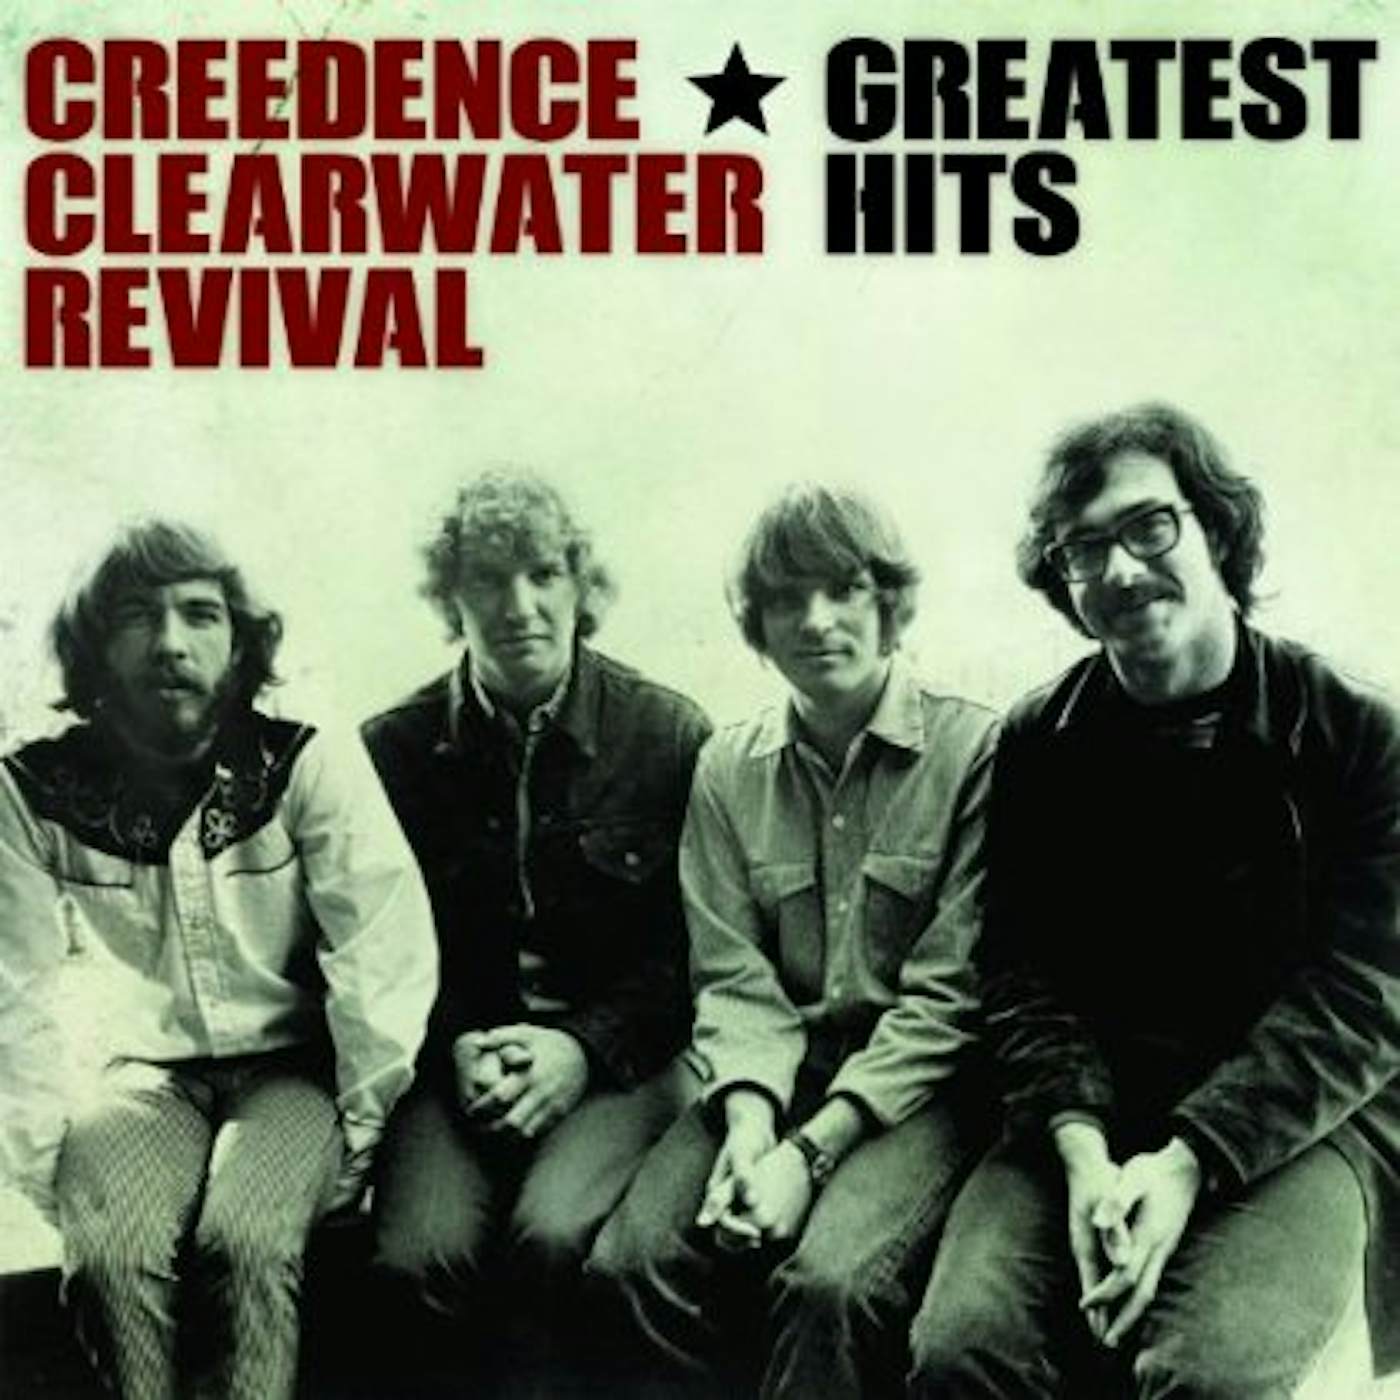 Creedence Clearwater Revival GREATEST HITS CD